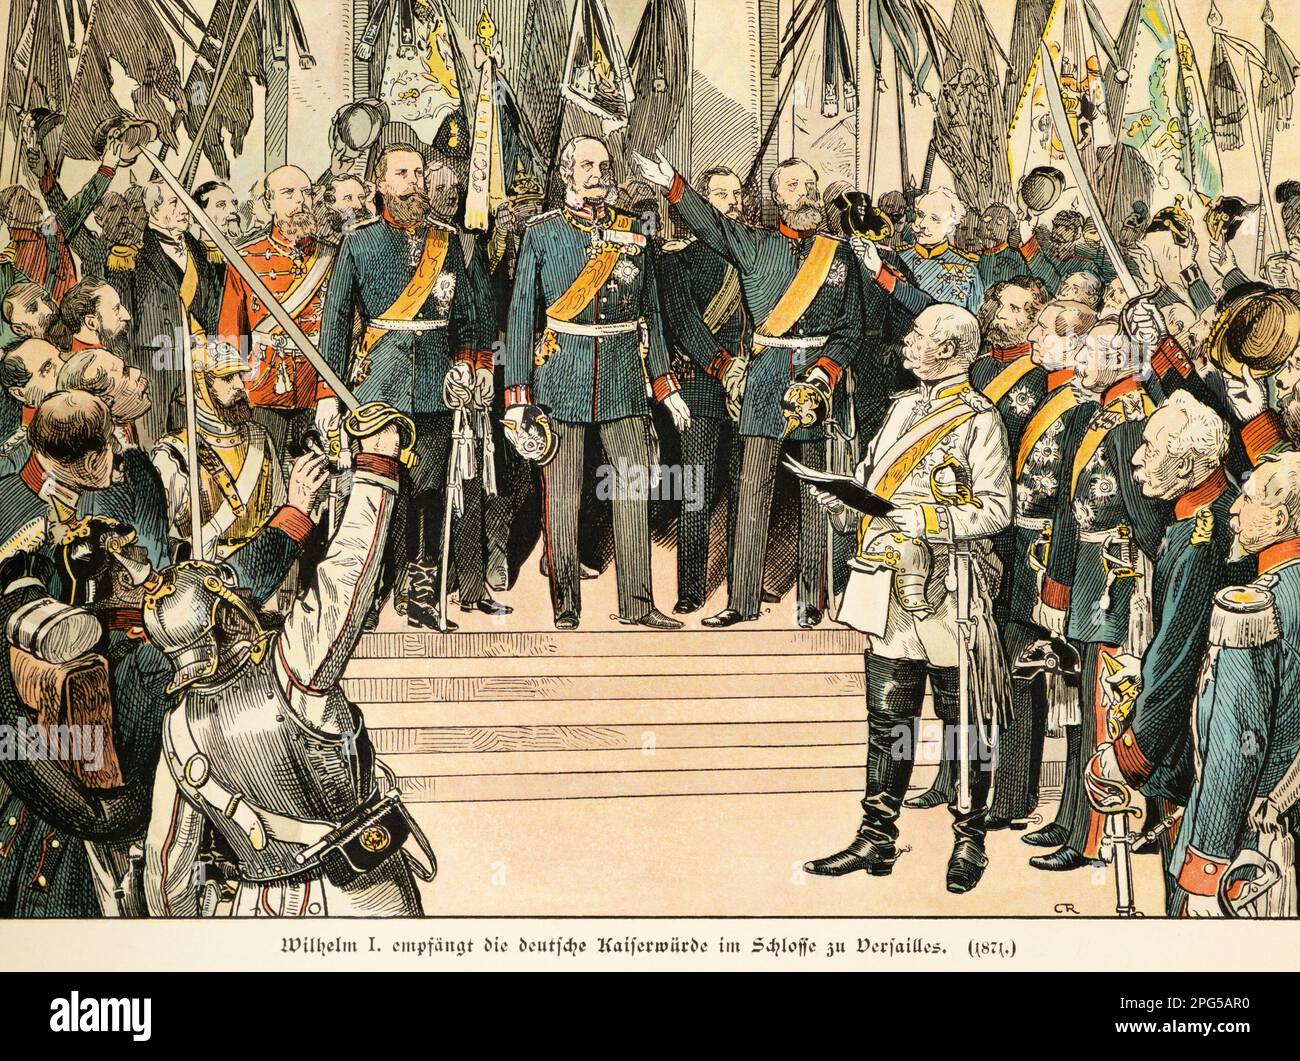 Wilhelm I. crowned German Kaiser,German Emperor in Versailles Palace in 1871, history of the Hohenzollern, Prussia, historical illustration 1899 Stock Photo